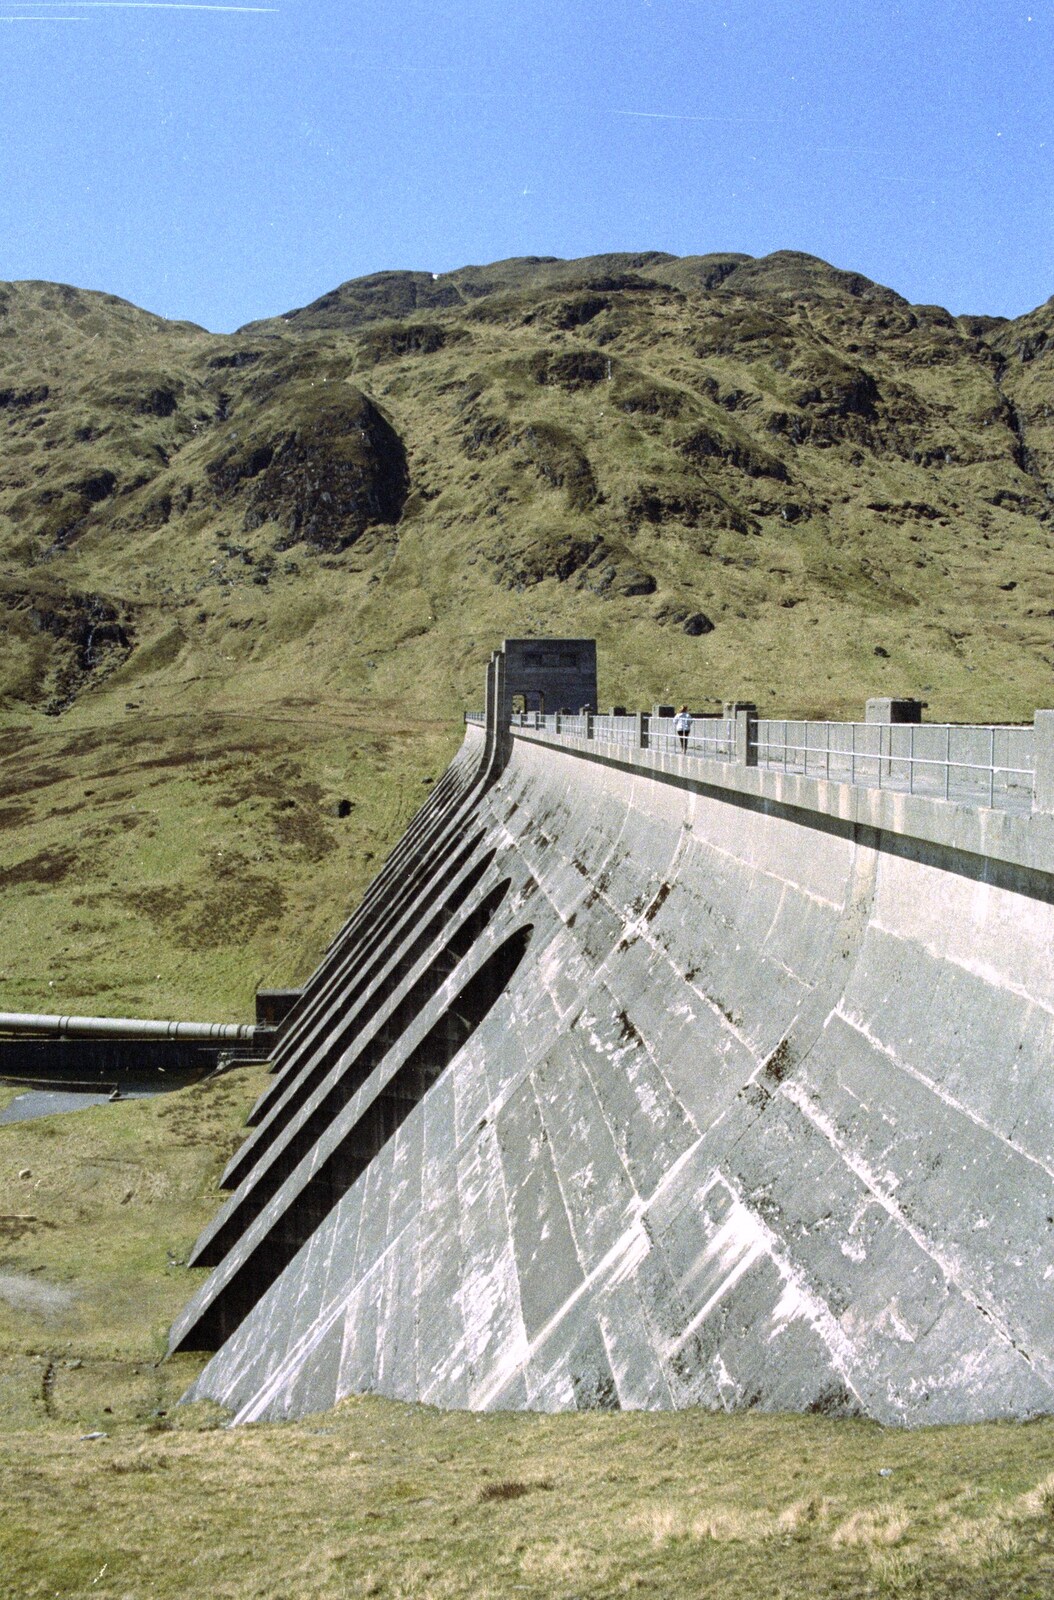 The dam at Loch Rannoch from A Trip to Pitlochry, Scotland - 24th March 1998